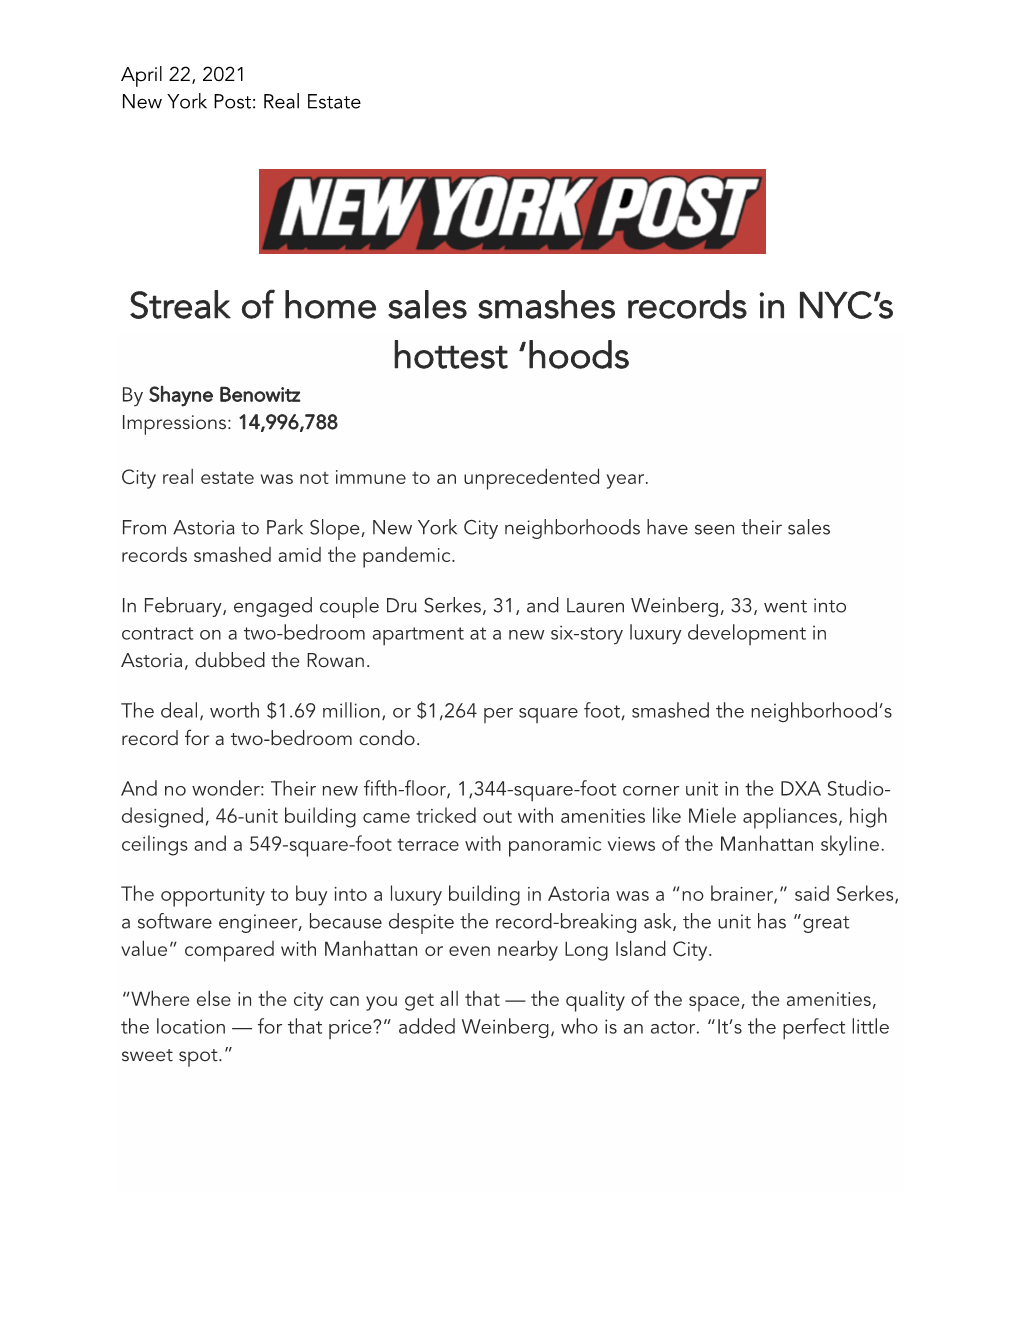 Streak of Home Sales Smashes Records in NYC's Hottest 'Hoods